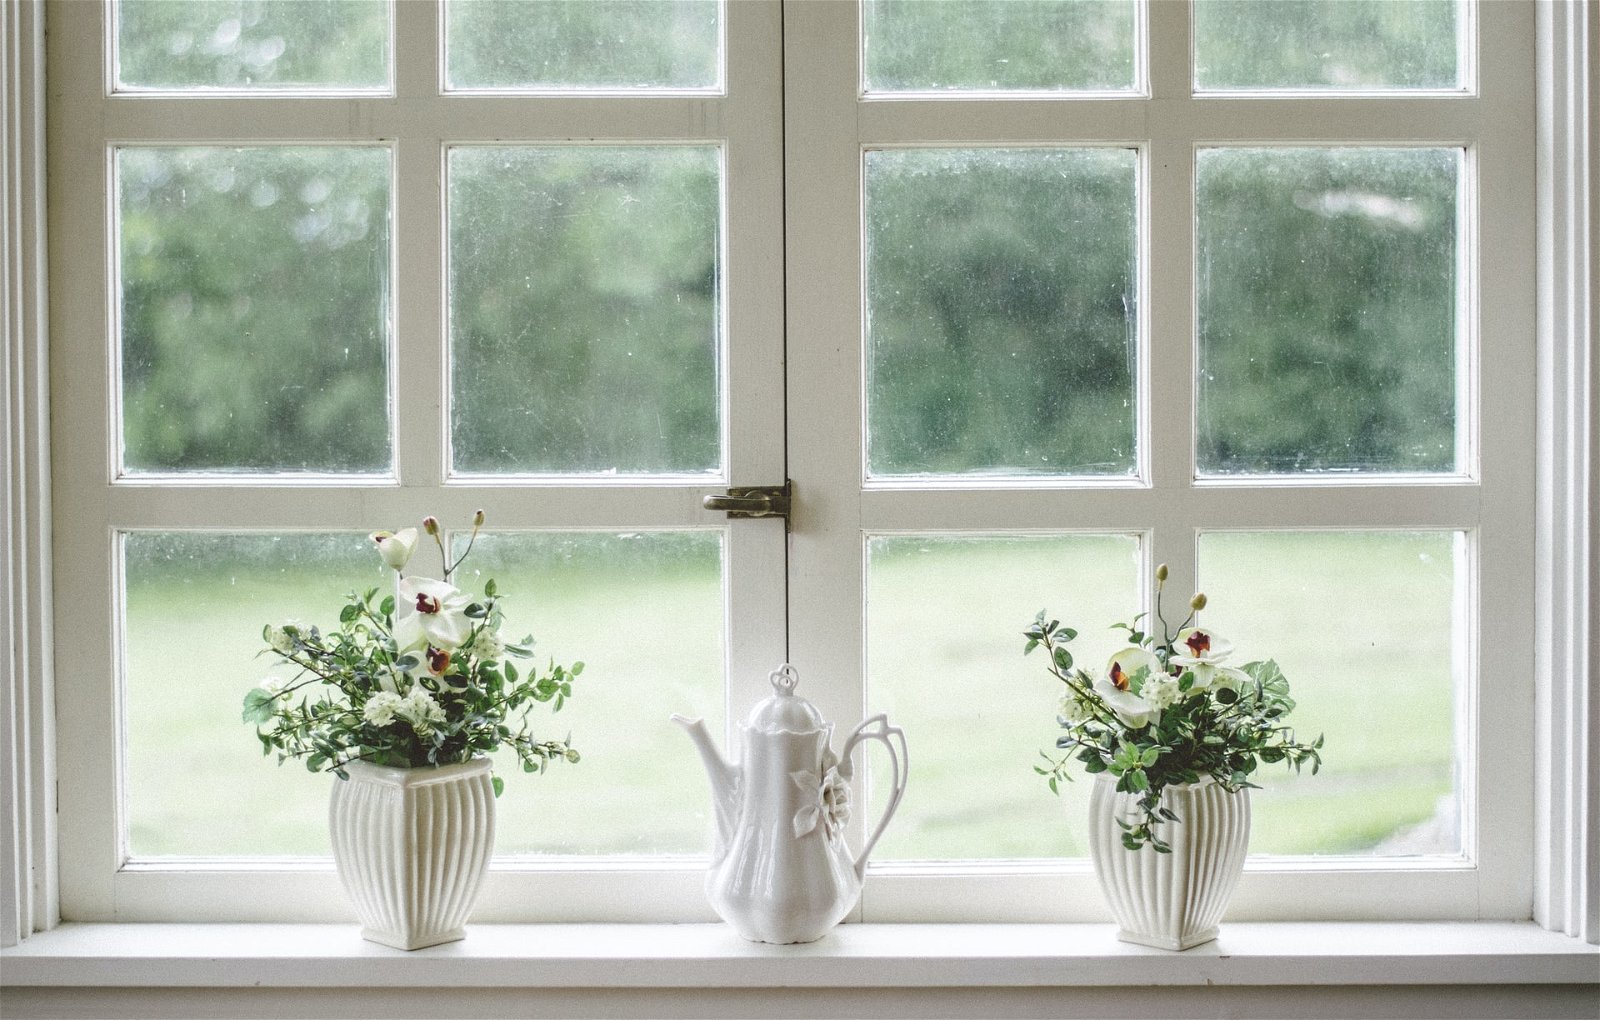 Window Problems Can Be Construction Defects | South Carolina Builder Lawsuit Attorney | Steinberg Law Firm